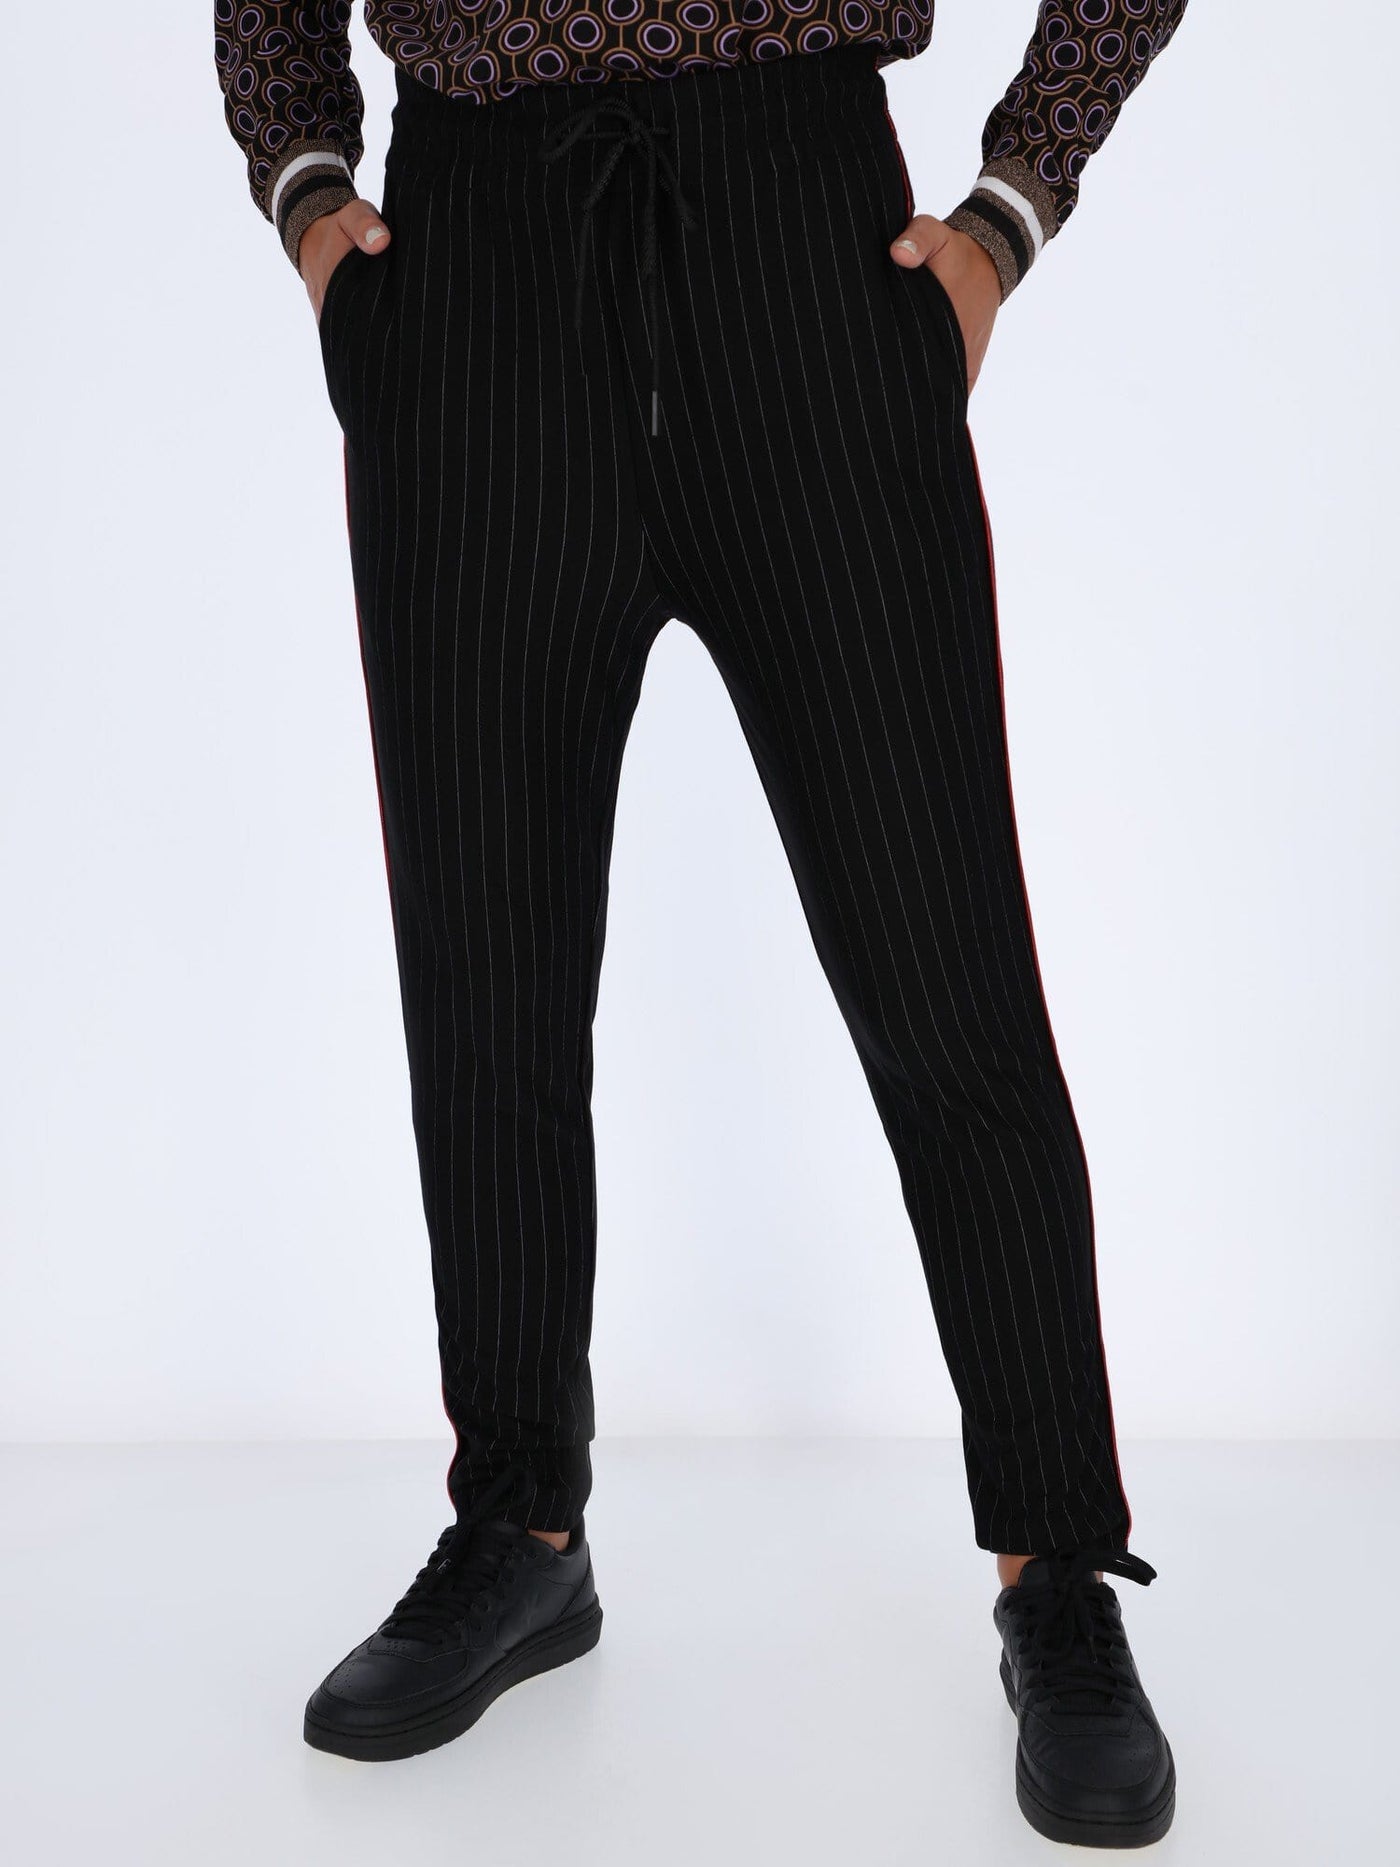 OR Pants & Leggings L / BLACK Thin Stripes Pants with Side Contrasting Stripe